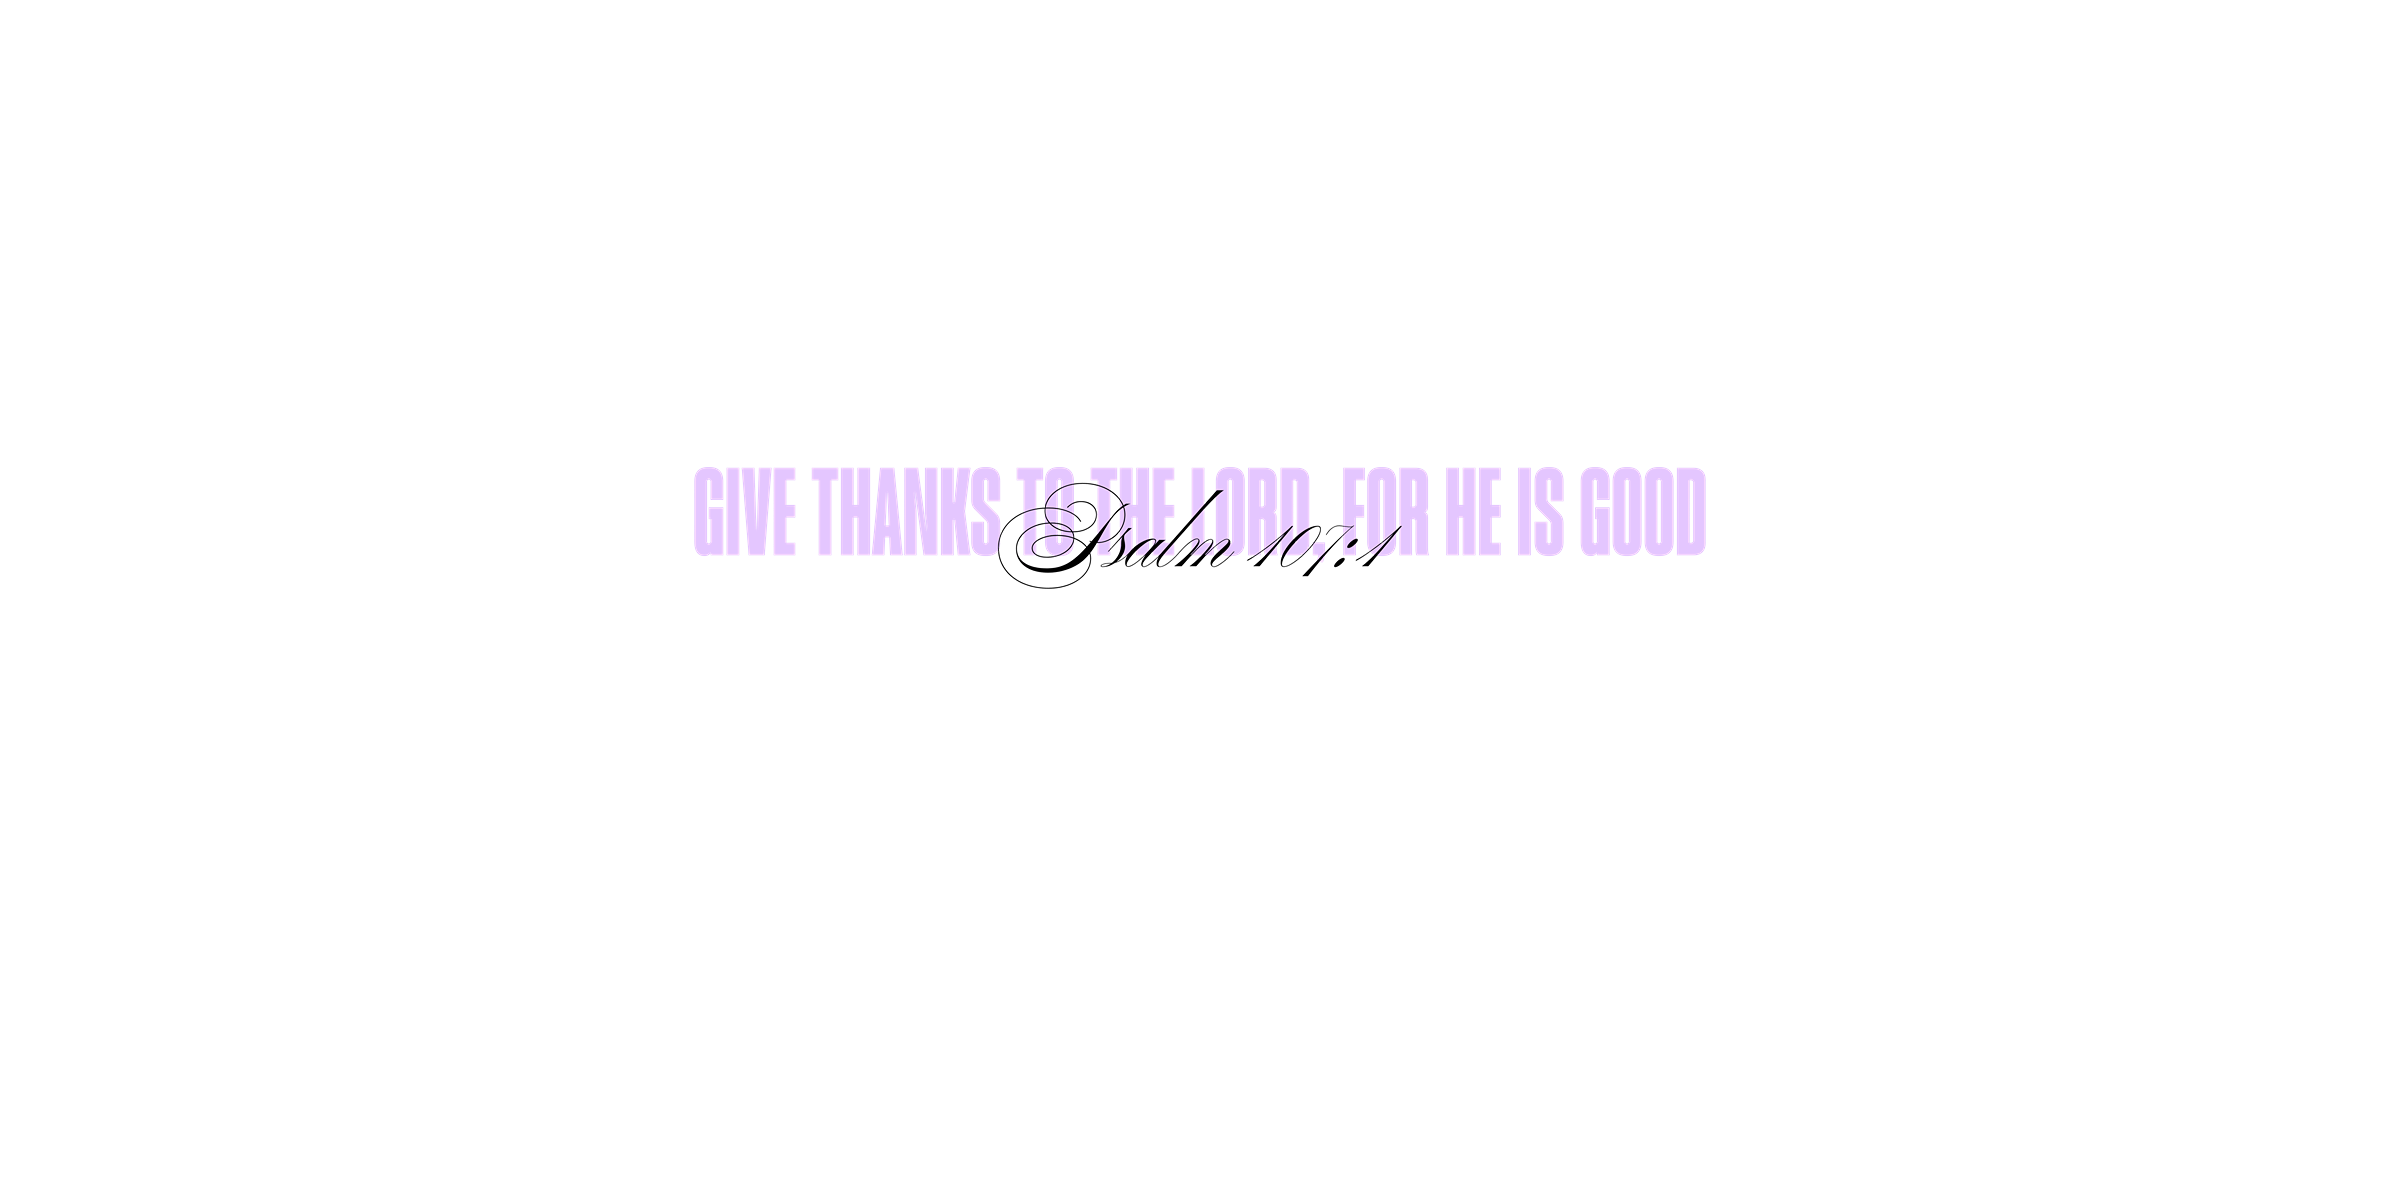 Psalm 107:1 - Give thanks to the LORD, for He is good